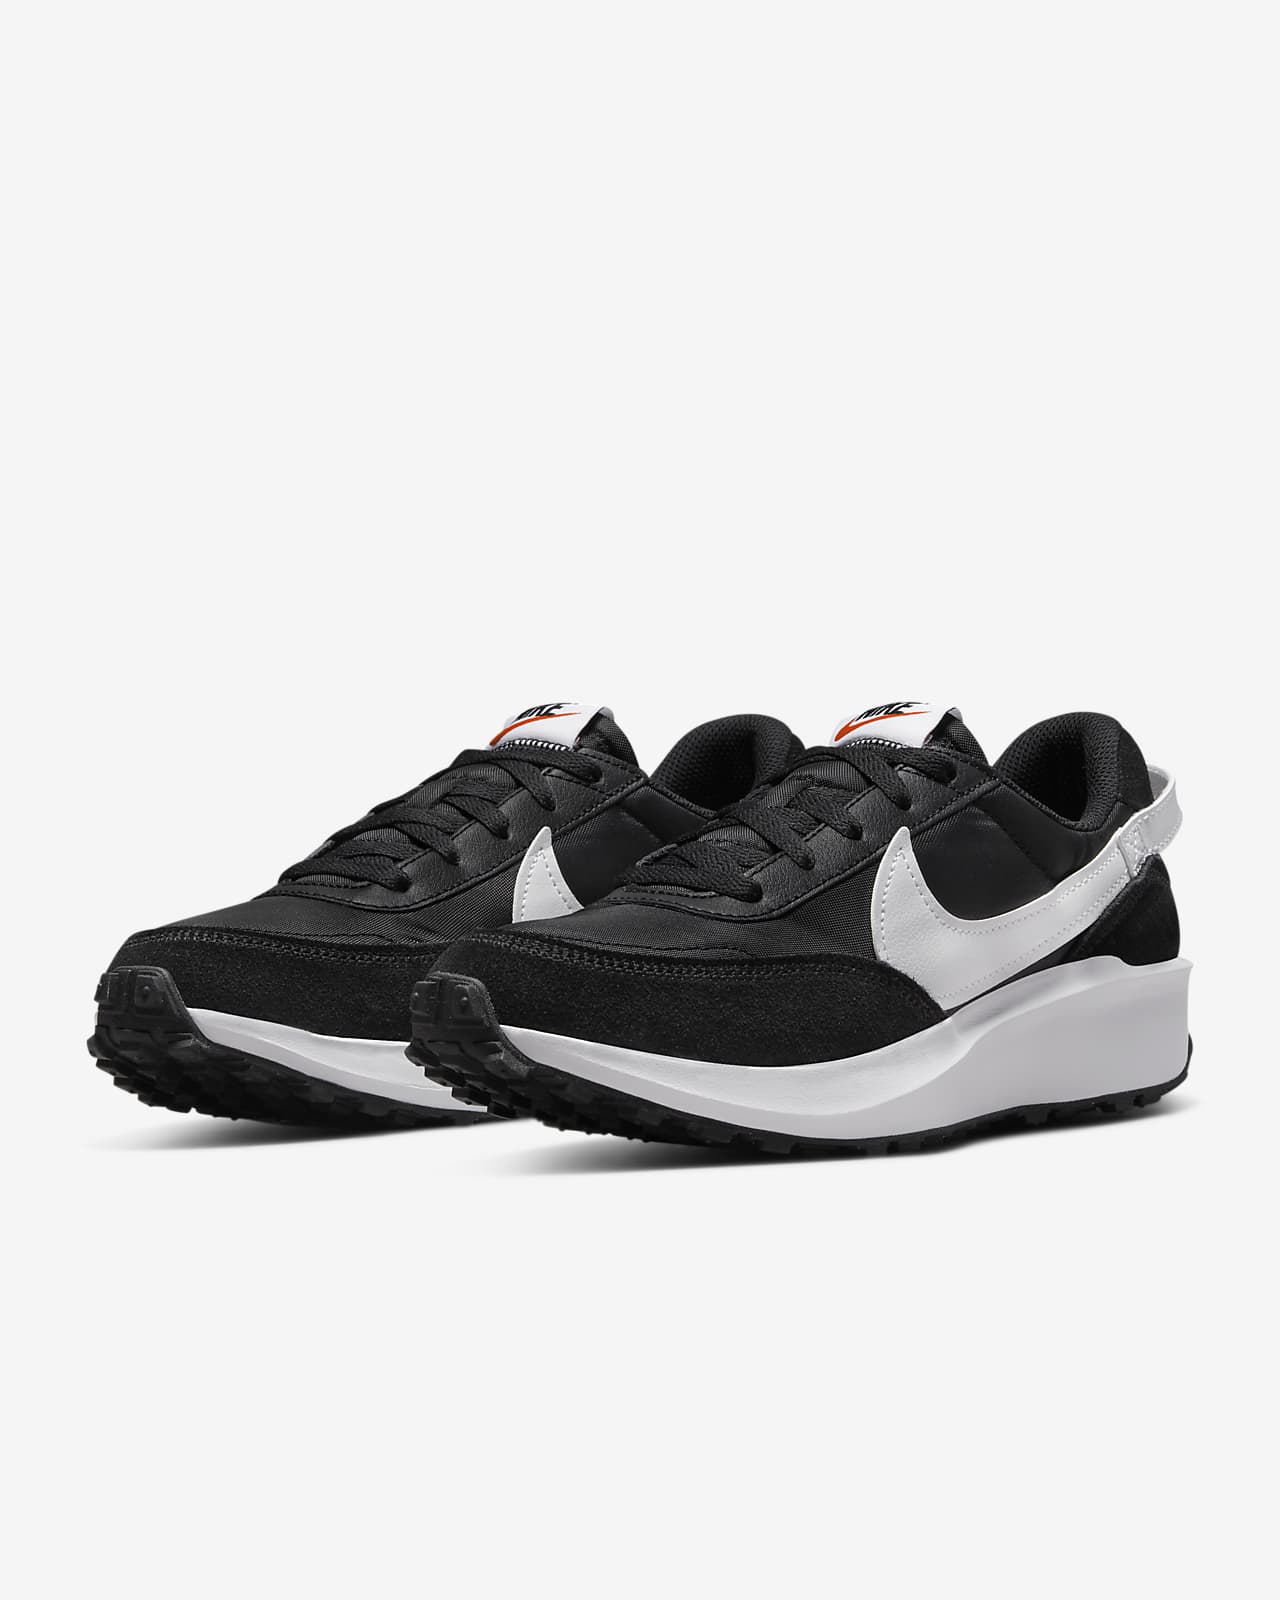 Chaussures Nike Waffle Debut pour Femme - DH9523